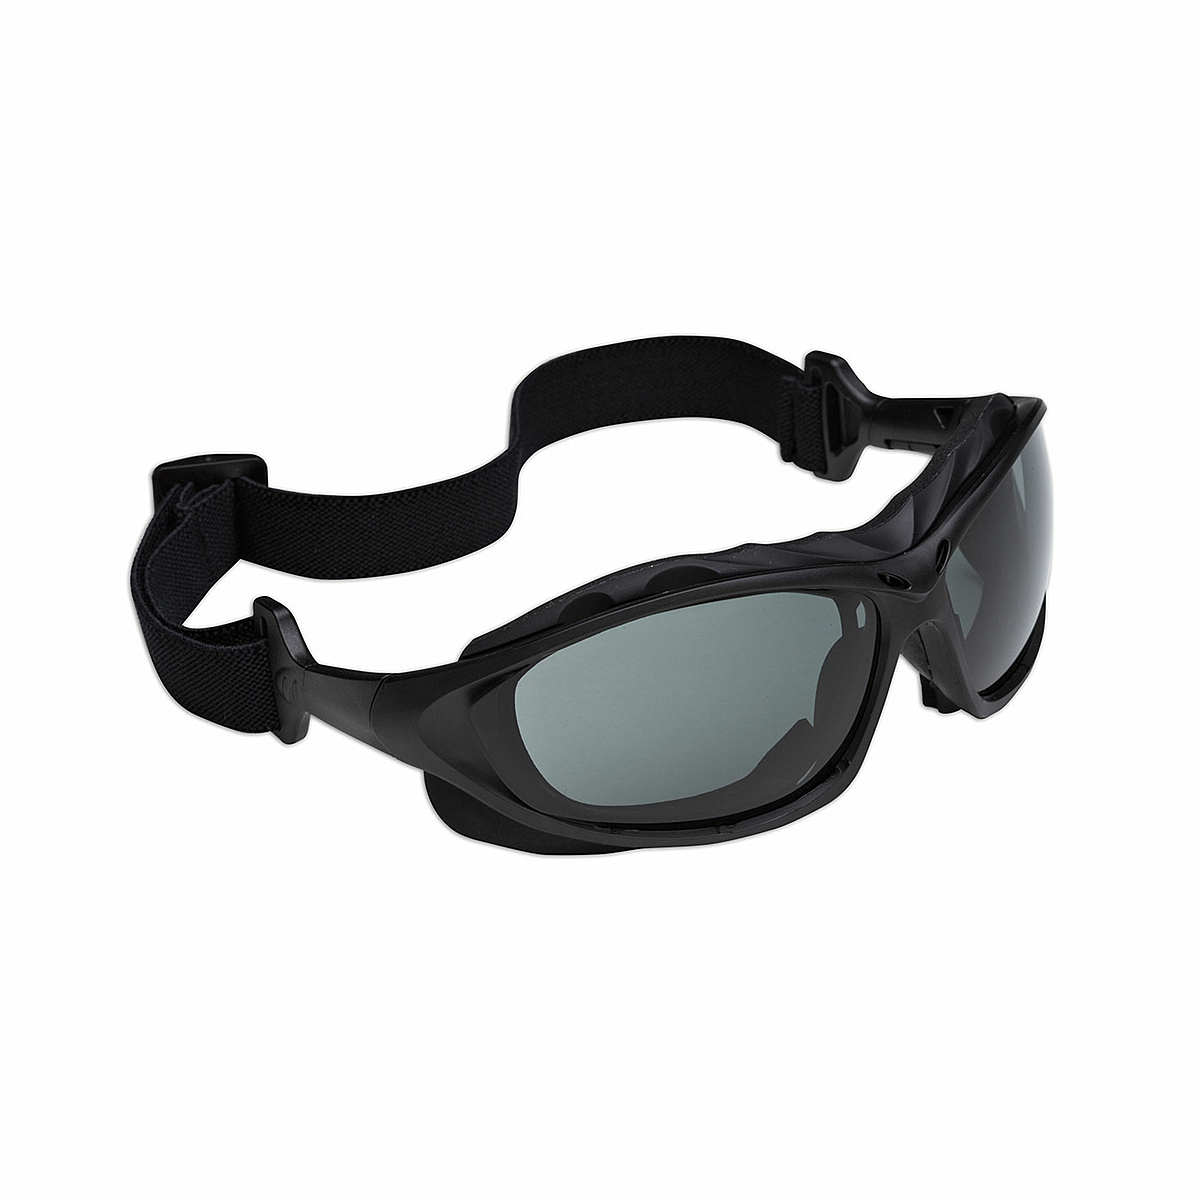 The “SpectaGoggle” EP900 Series Safety Goggles With Strap - Smoke Grey Lens